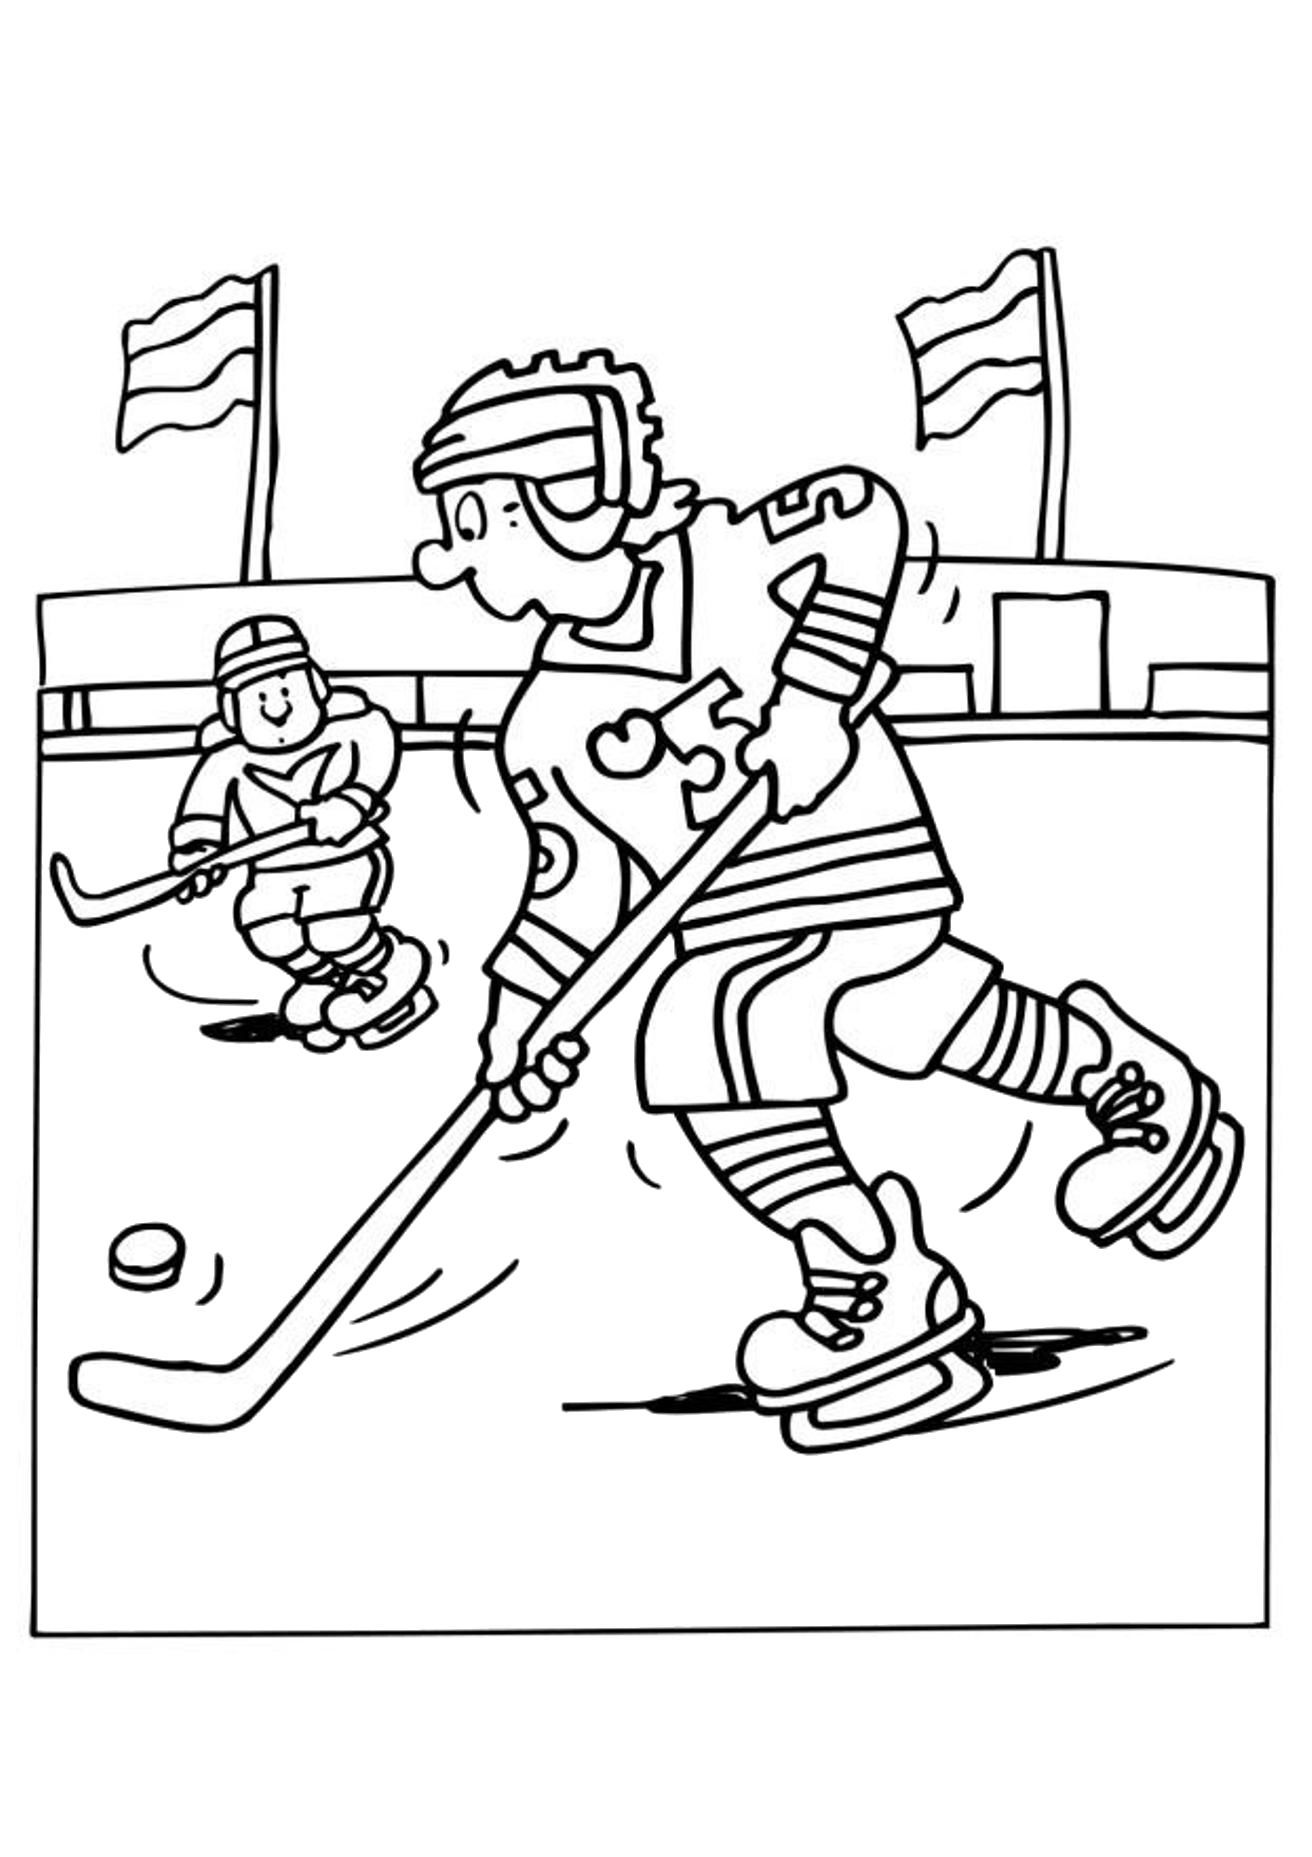 olympic hockey coloring pages